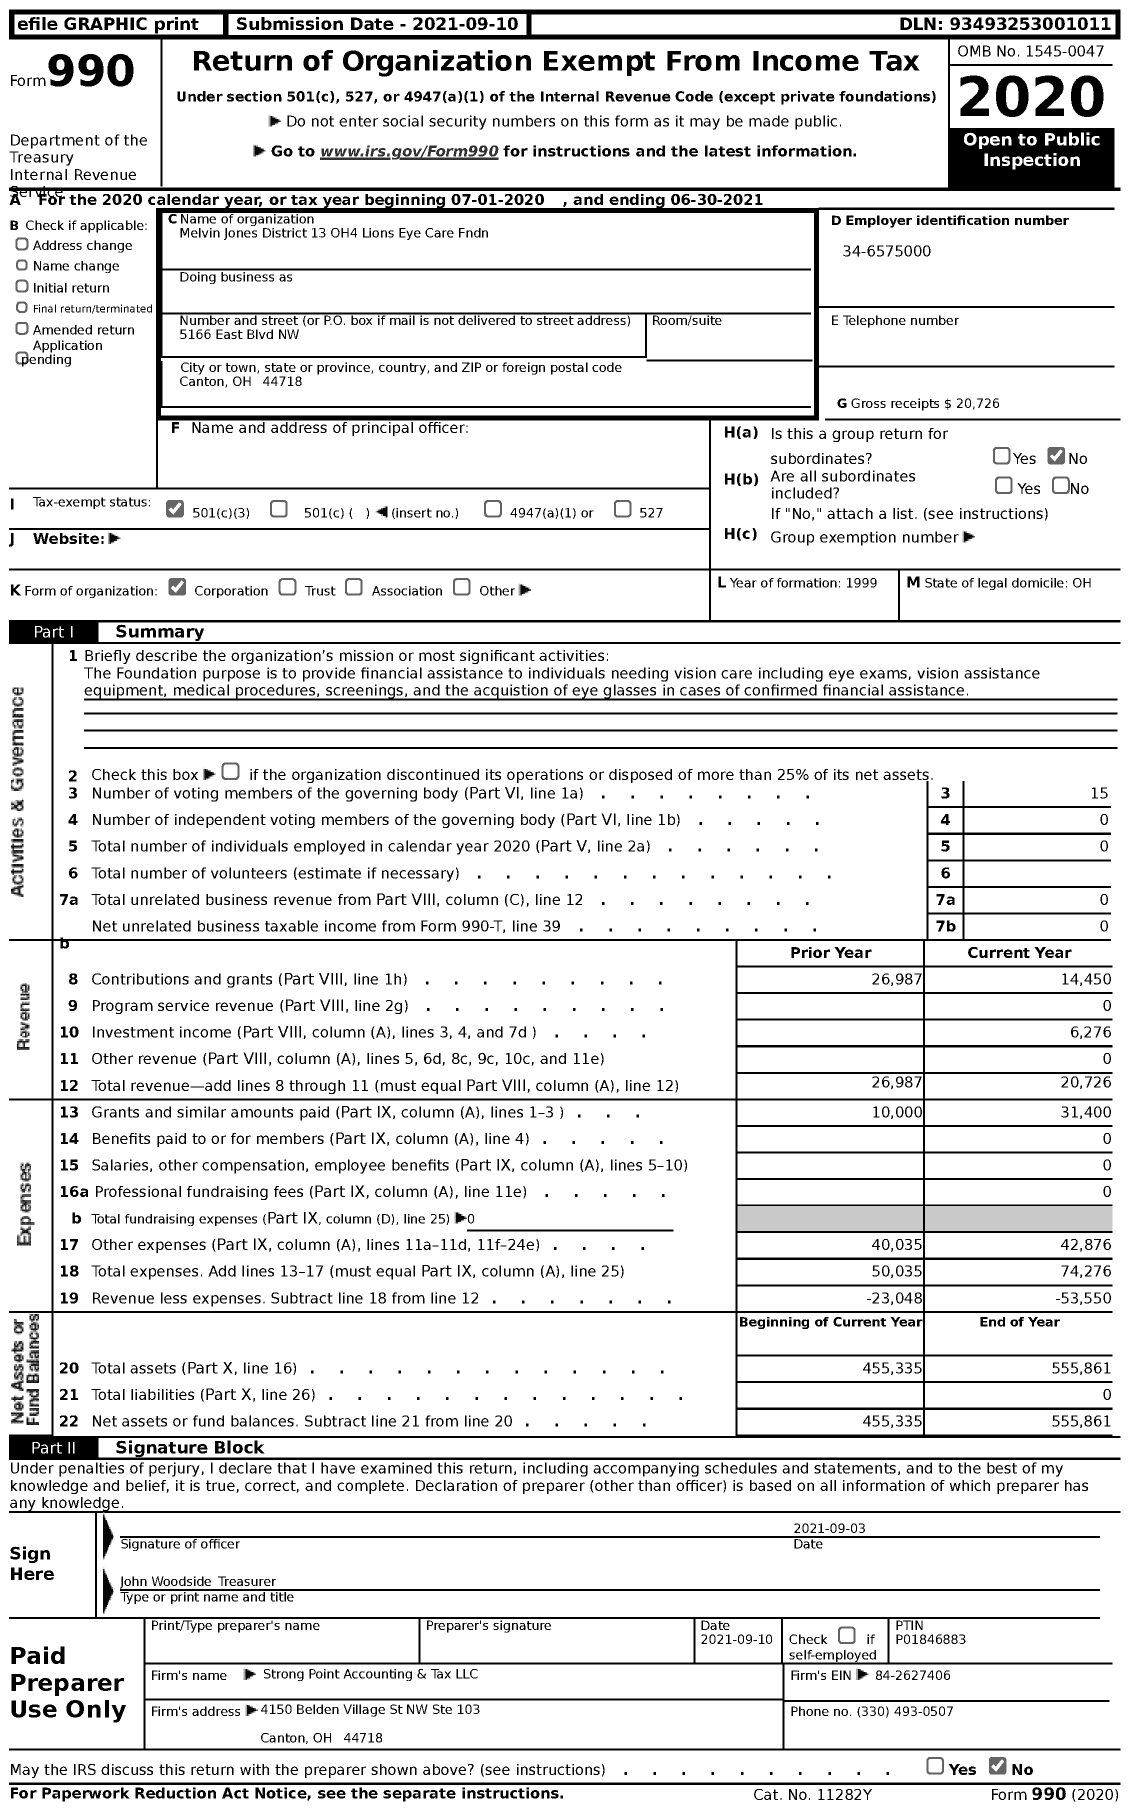 Image of first page of 2020 Form 990 for Melvin Jones District 13 OH4 Lions Eye Care Foundation